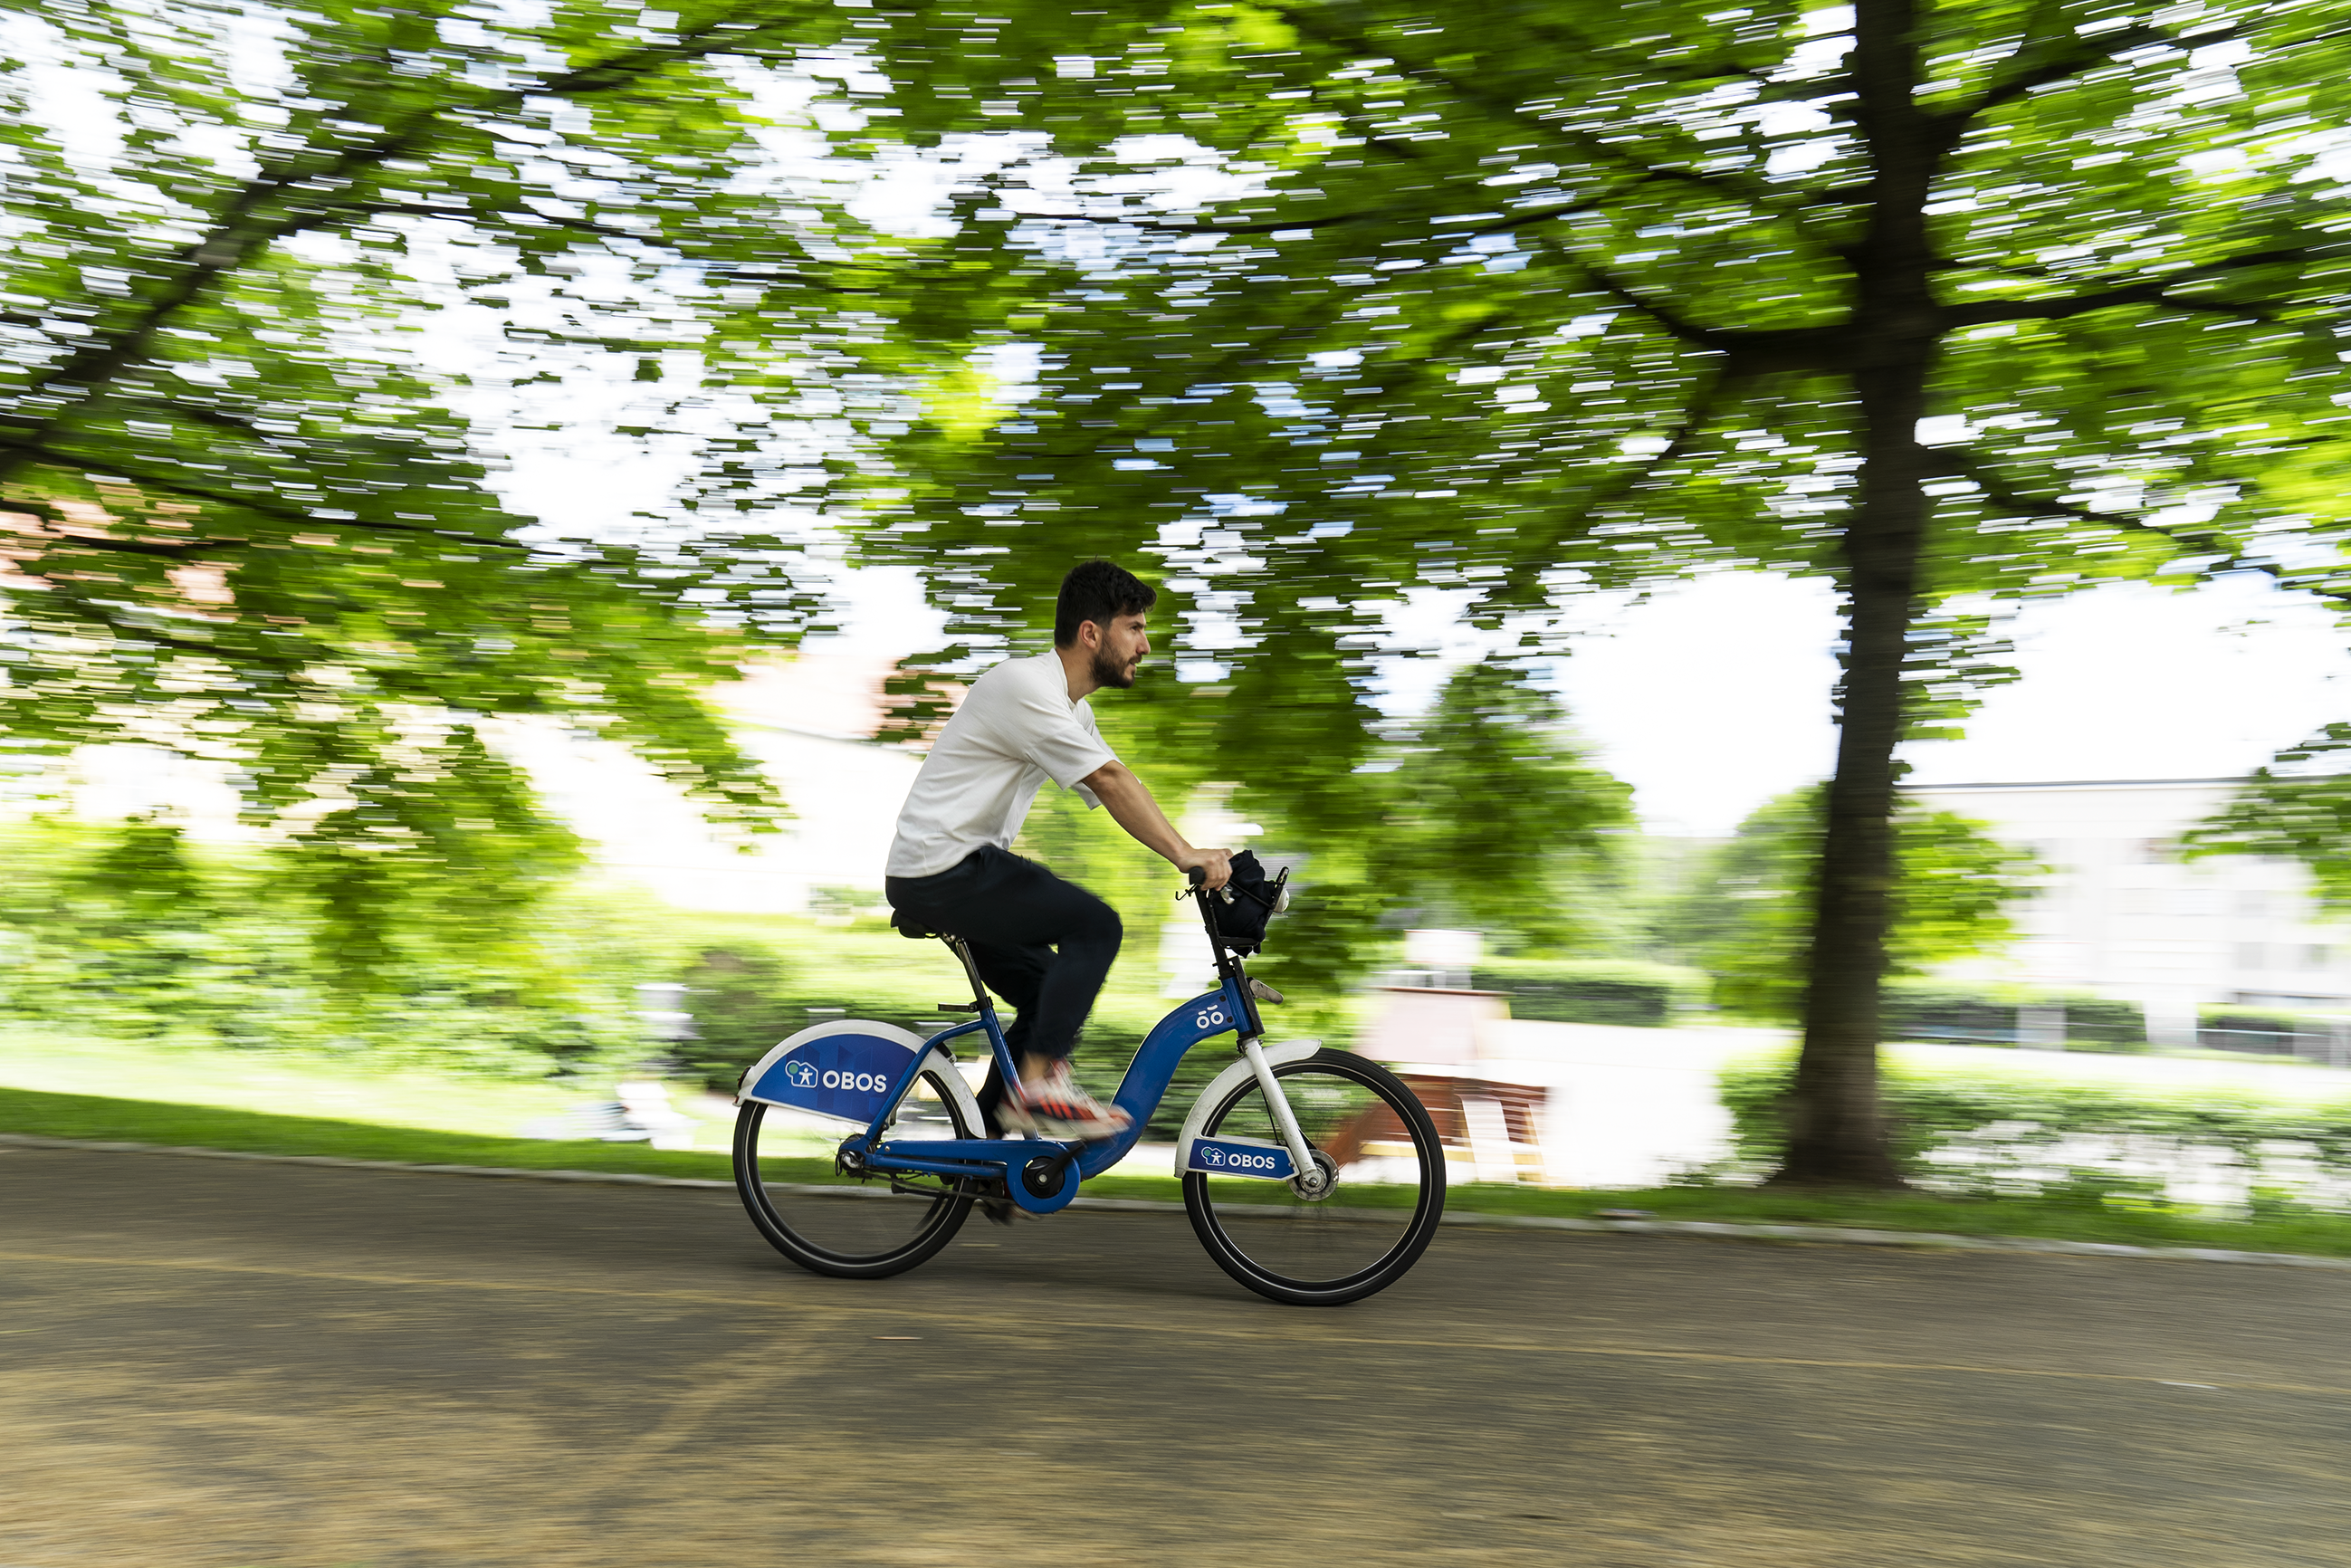 Young man riding an Oslo City bike in a park.